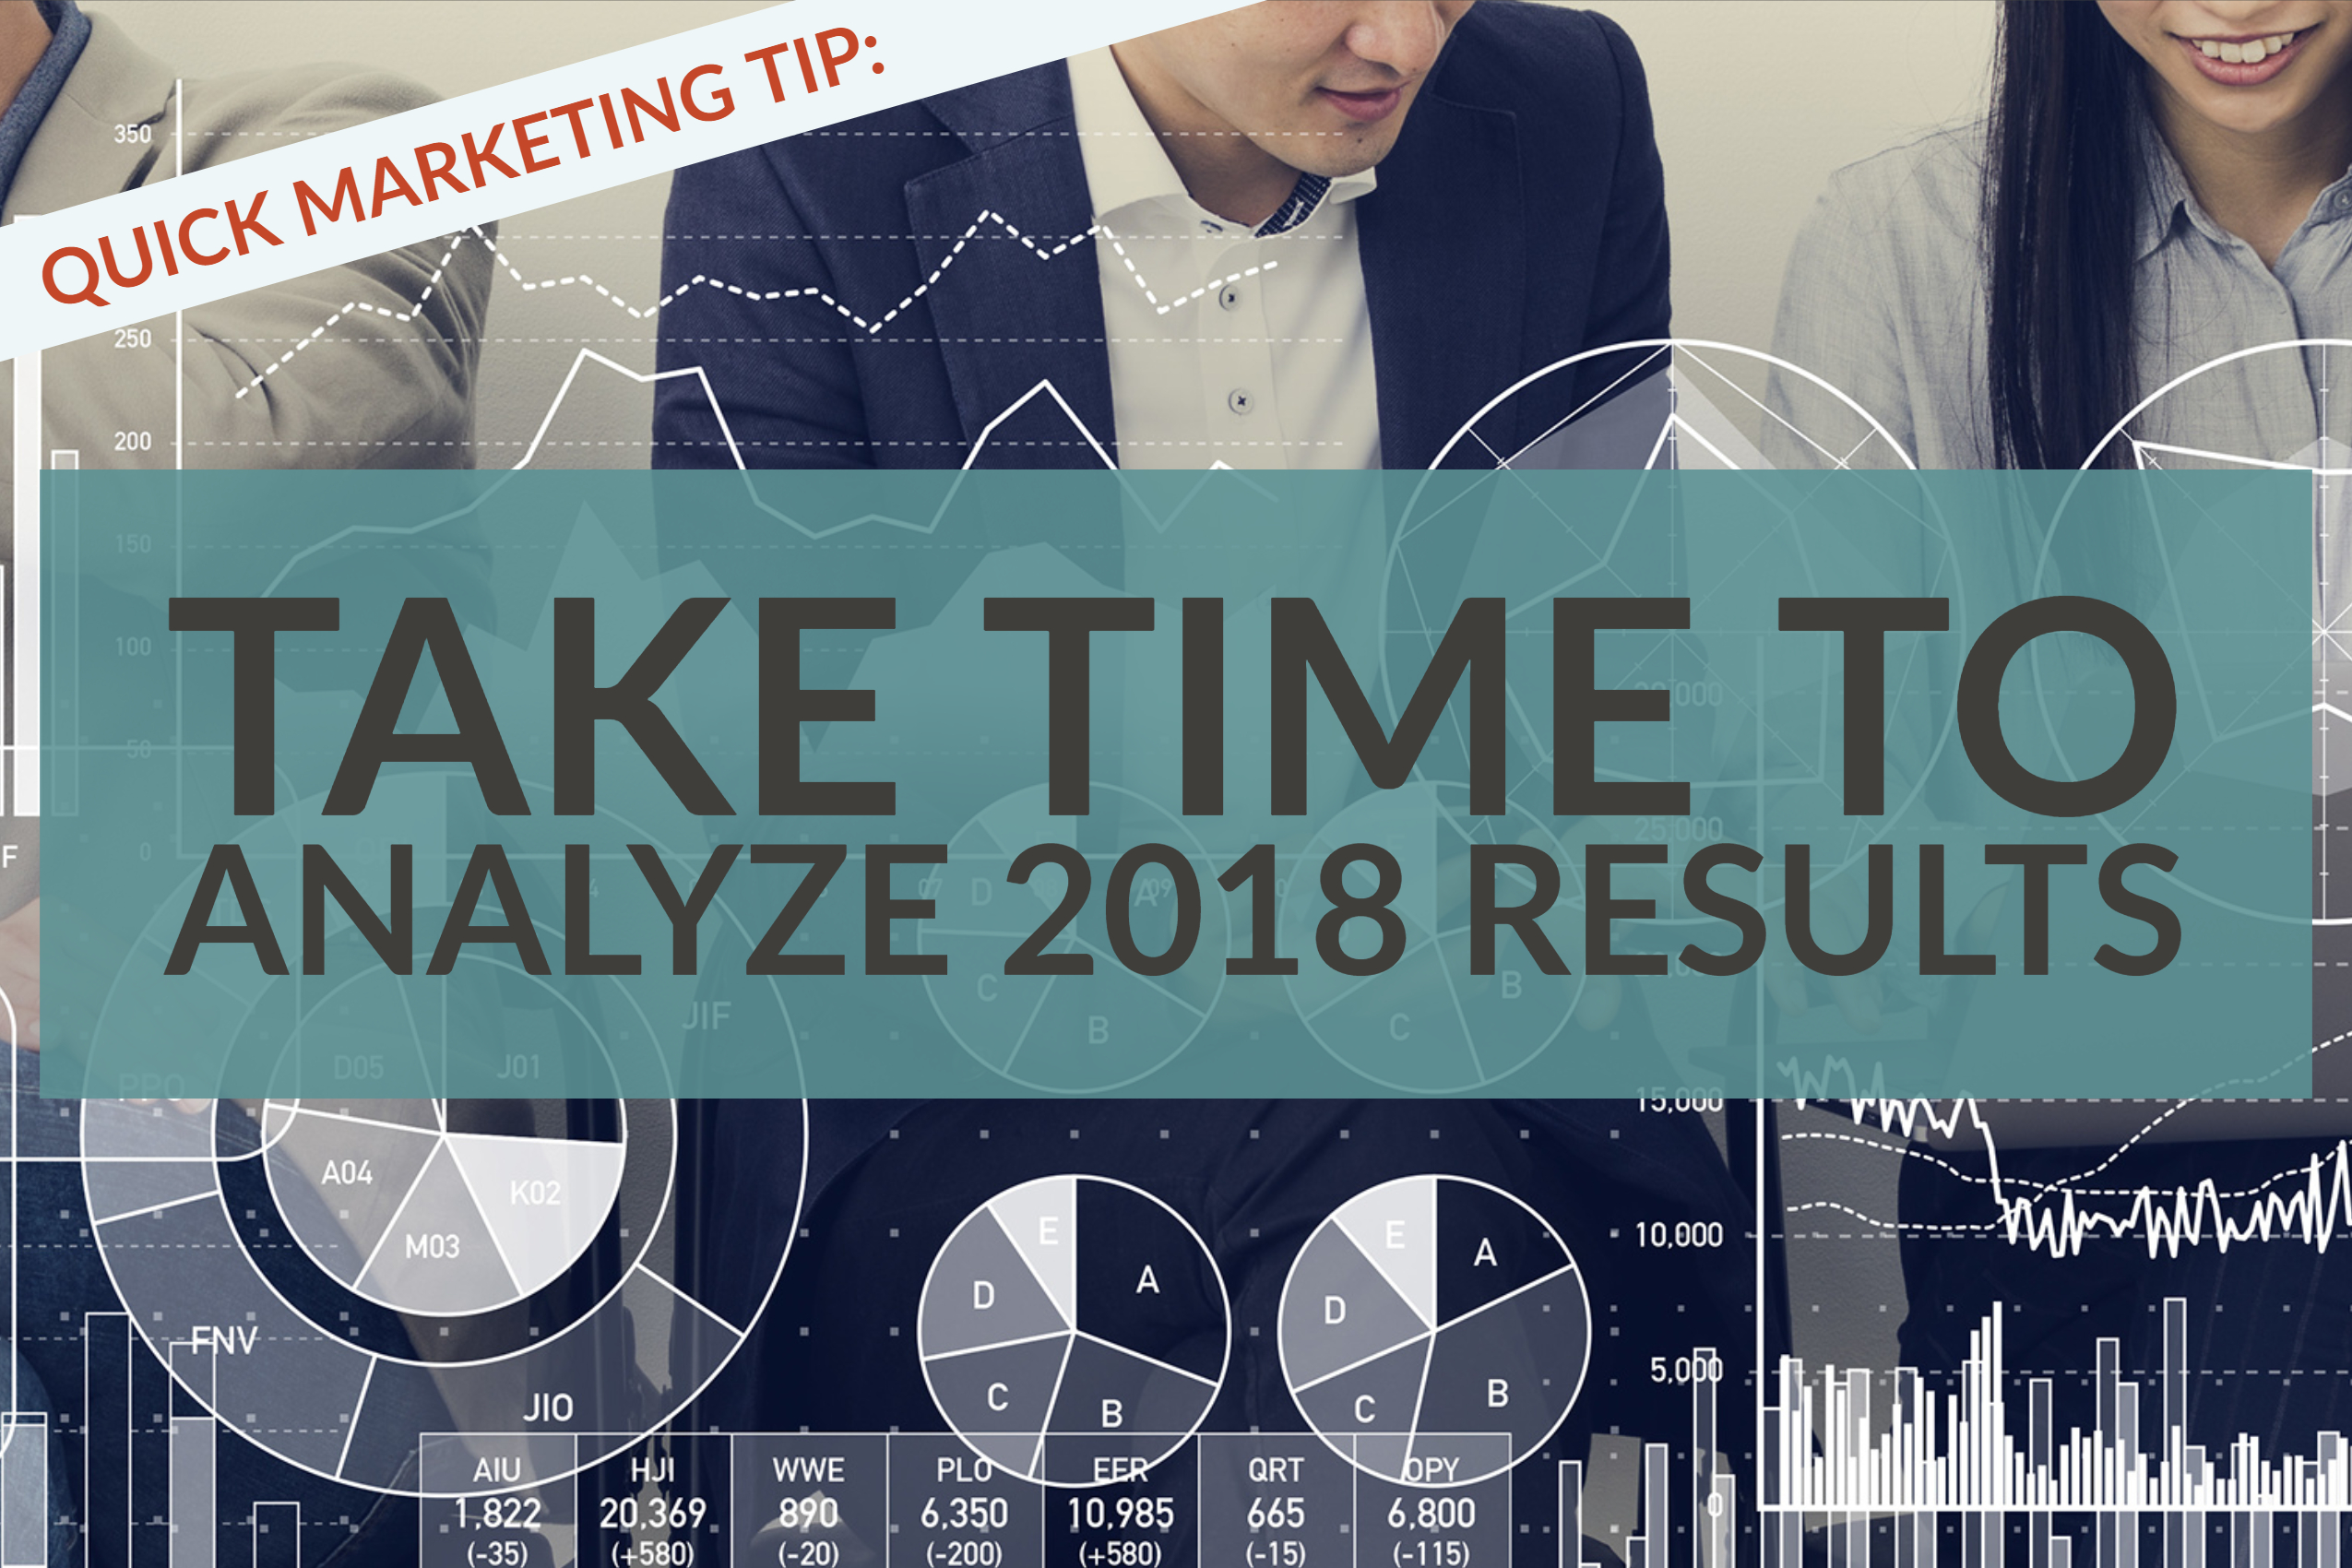 Quick Marketing Tip: Take Time To Analyze 2018 Results